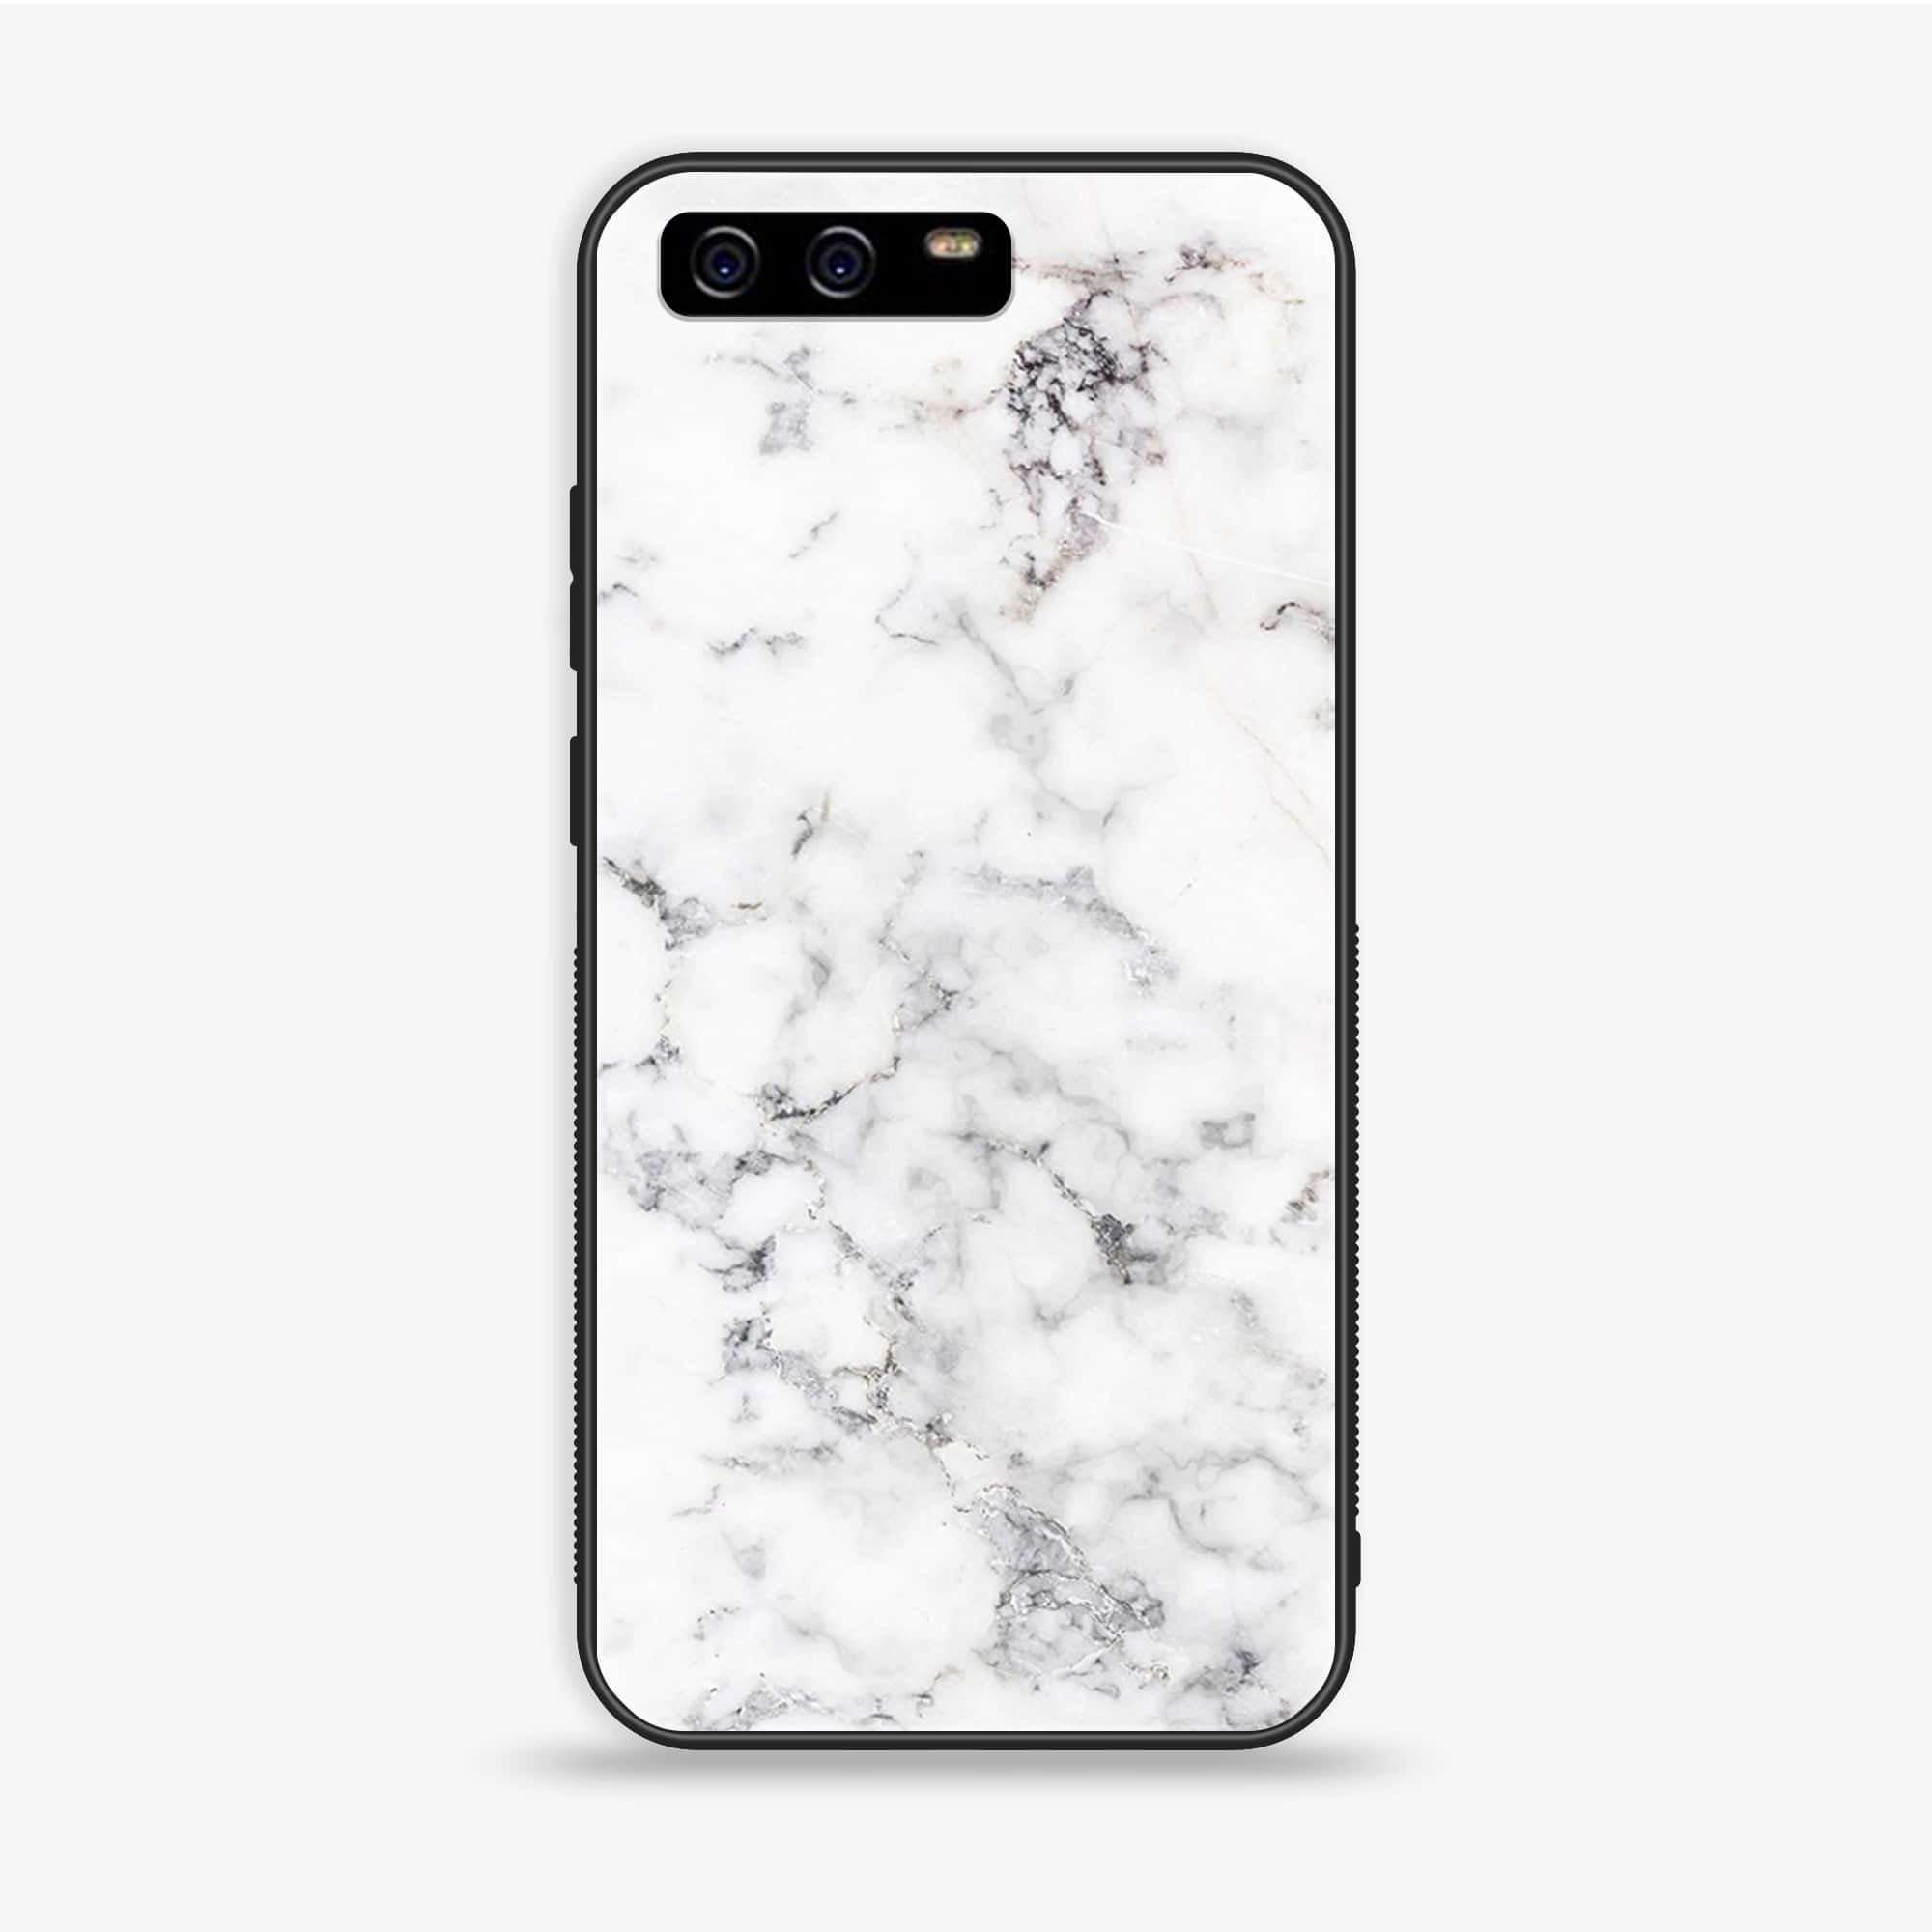 Huawei P10 - White Marble Series - Premium Printed Glass soft Bumper shock Proof Case